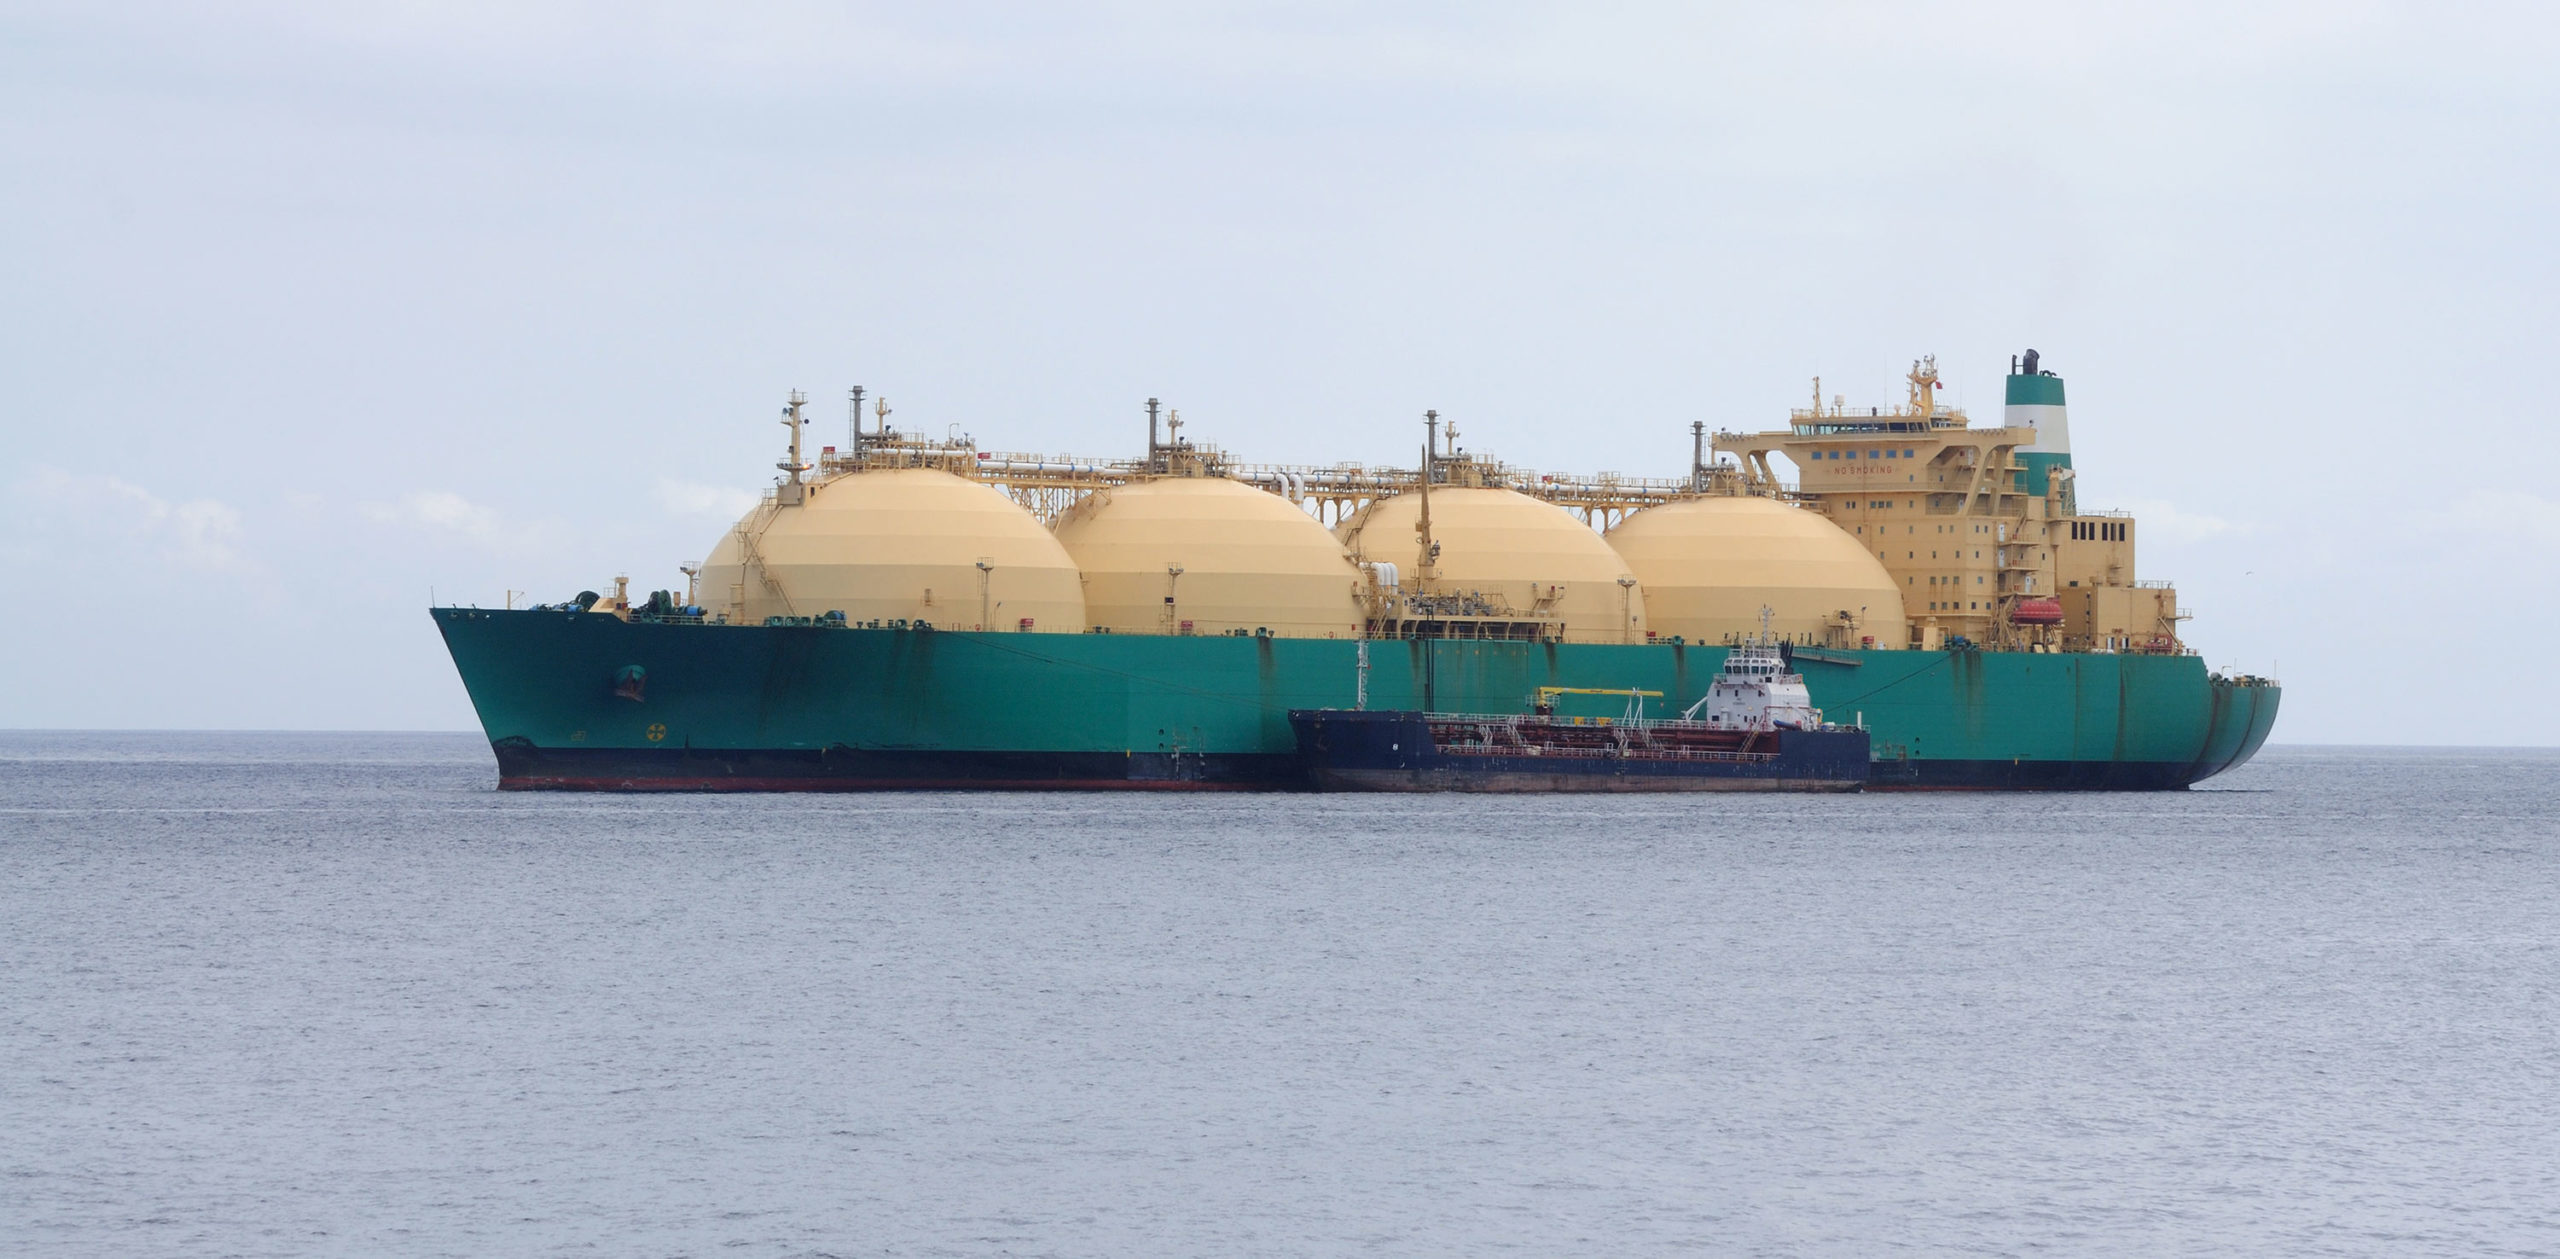 Will New LNG Trade Routes Support Demand for LNG Carriers?